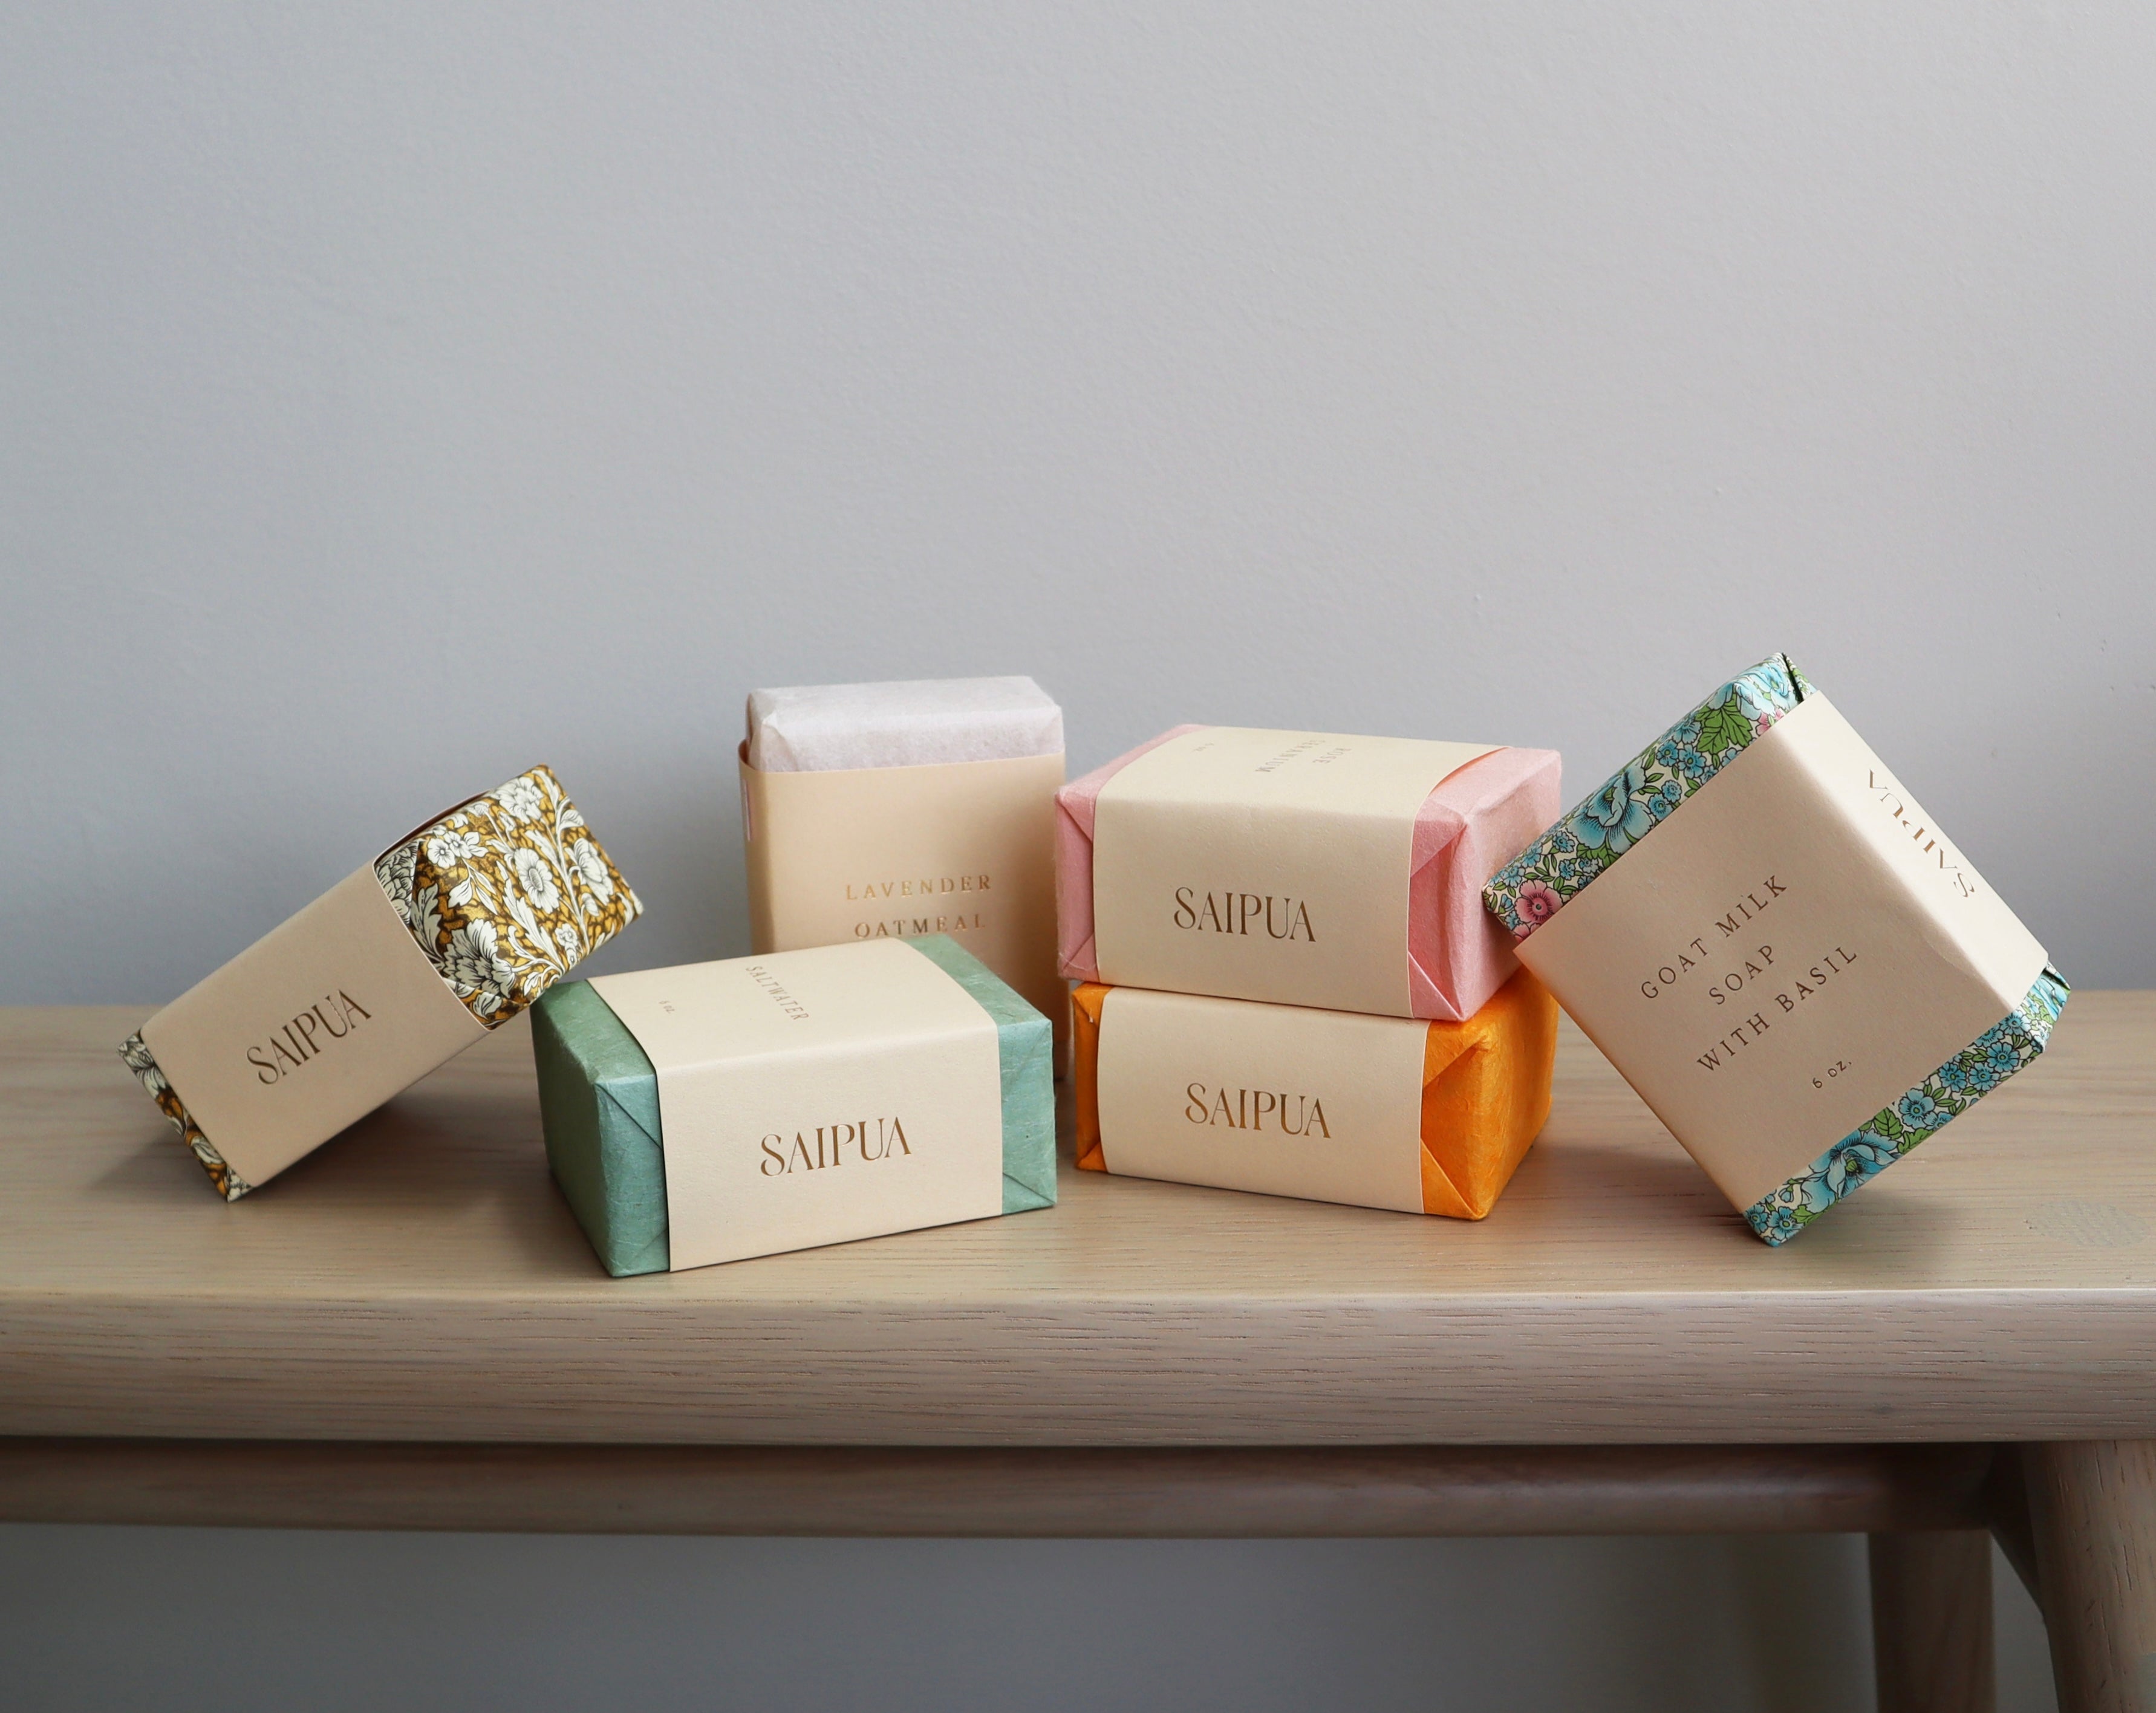 Skincare; a collection of soaps, oils, lotions and bath salts from France, Portugal, New York and Los Angeles. 